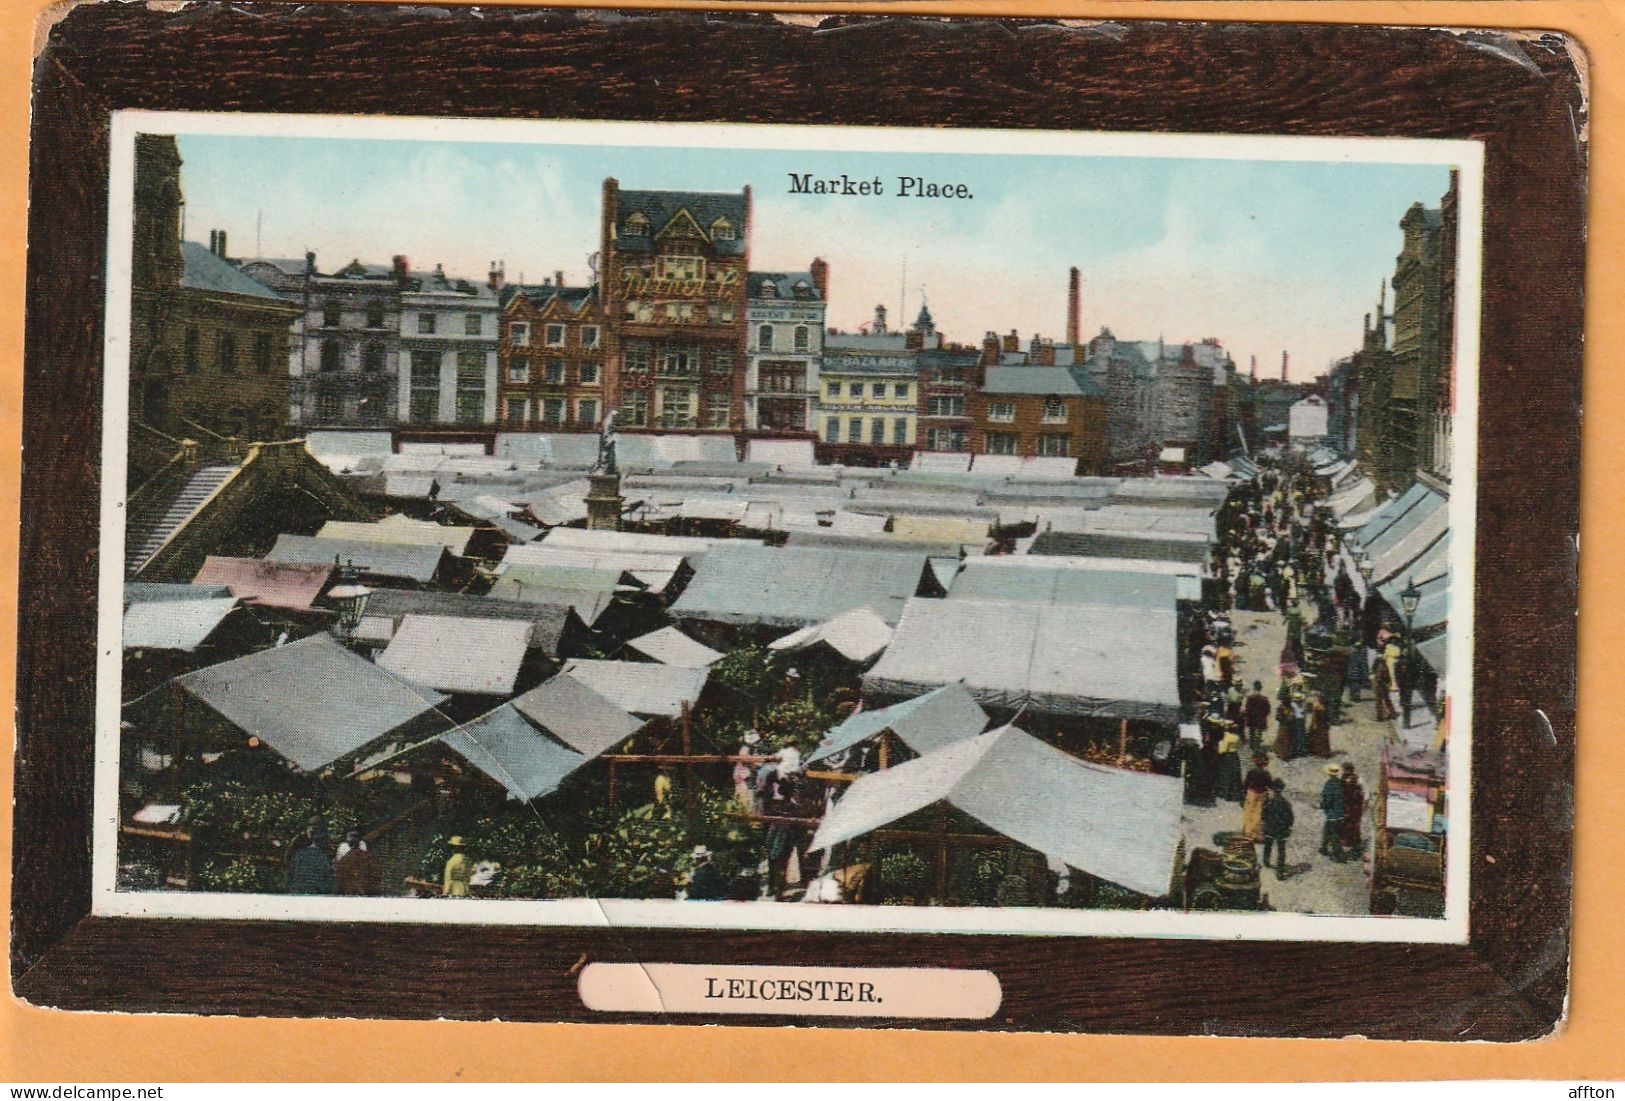 Leicester UK 1906 Postcard - Leicester